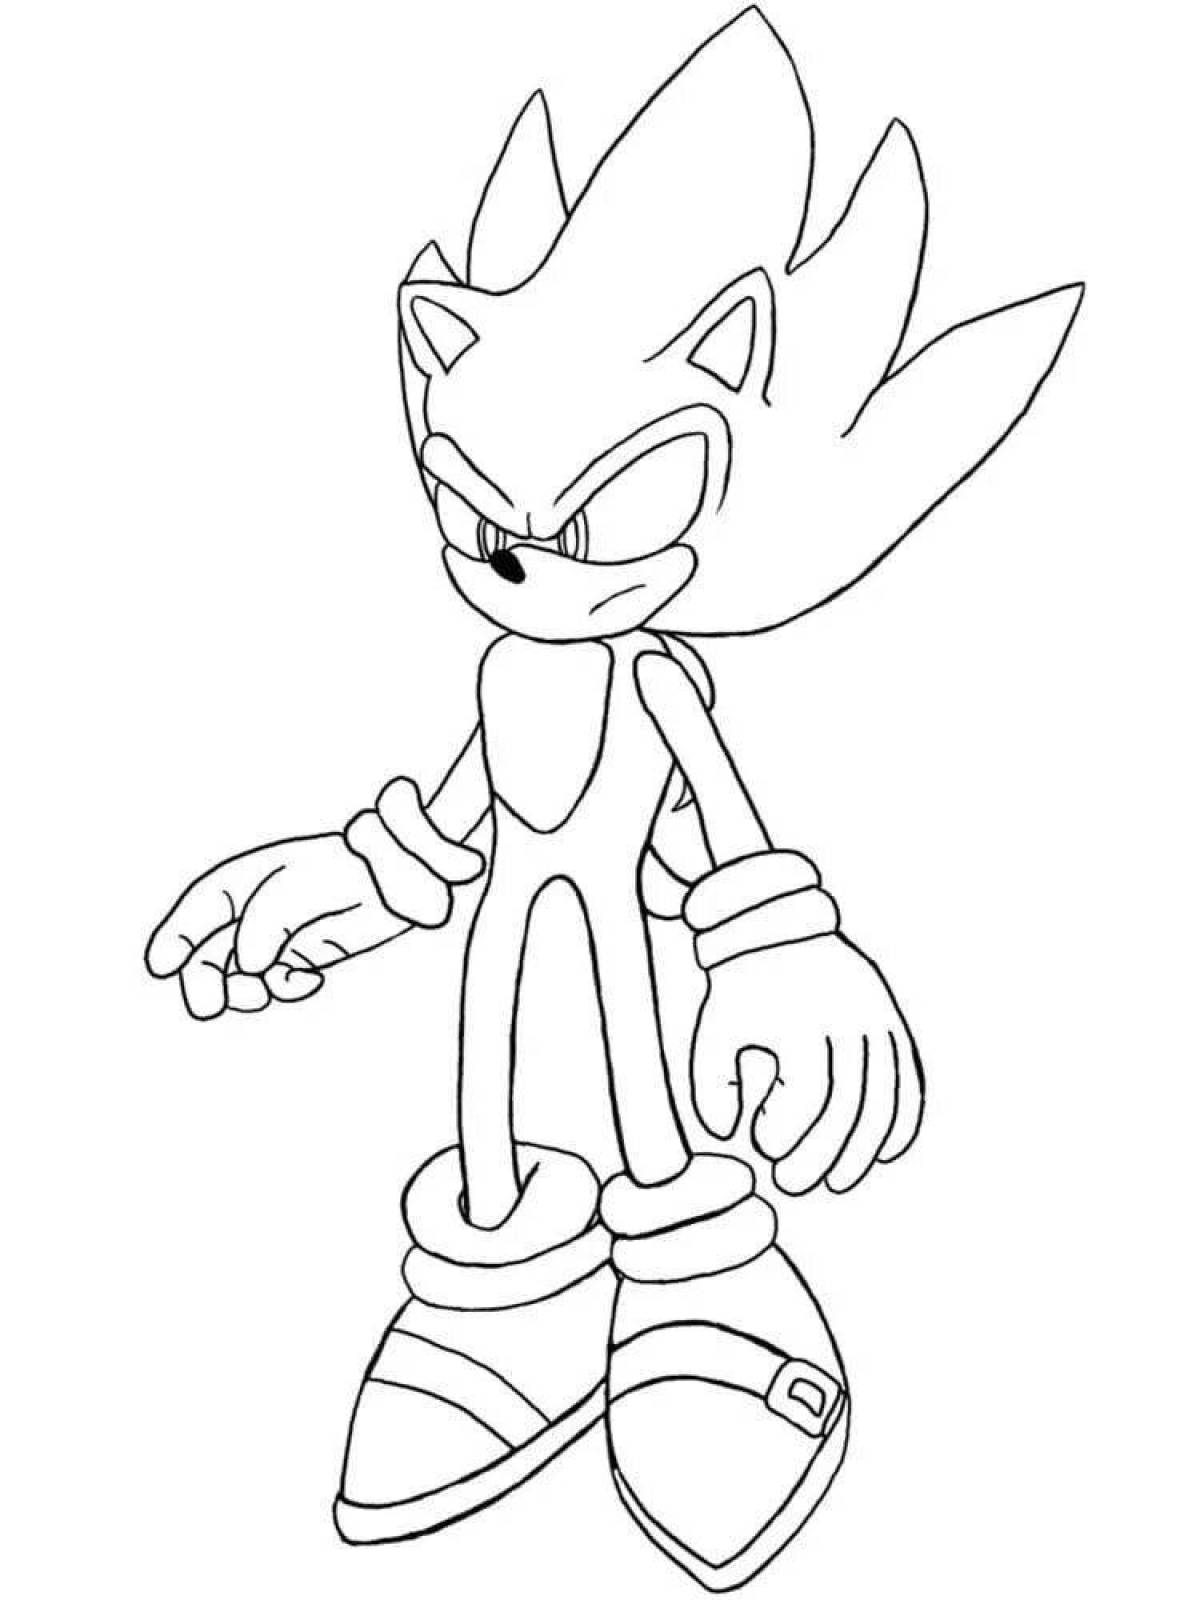 Color-delight new year sonic coloring page